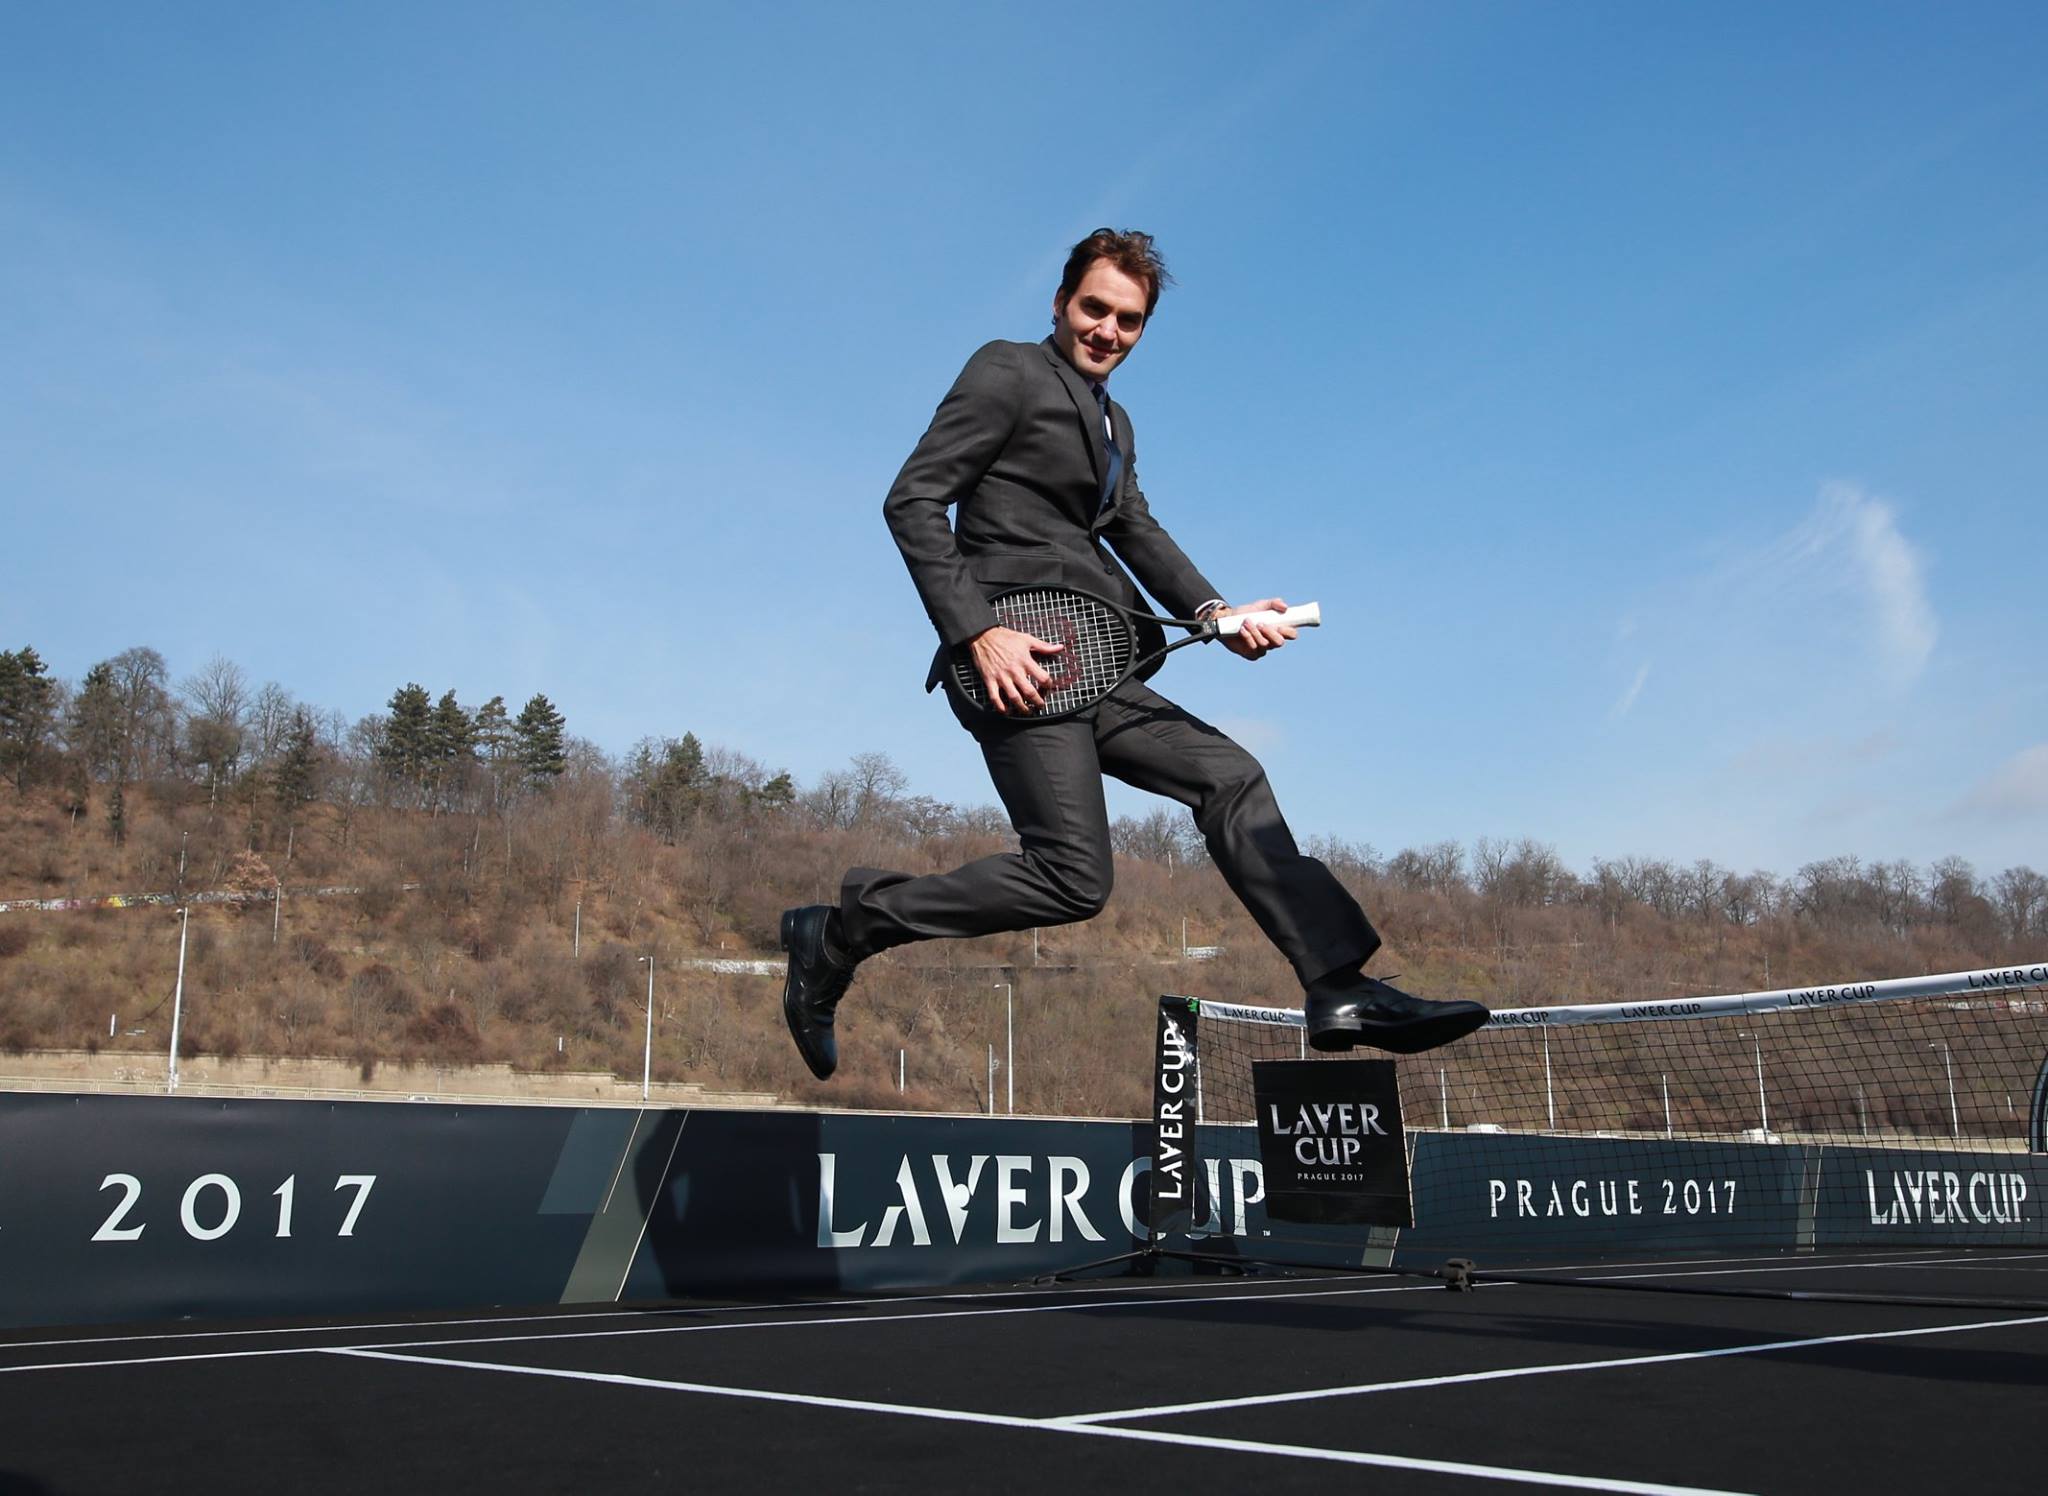 WATCH: Federer and Berdych Start Laver Cup Countdown 